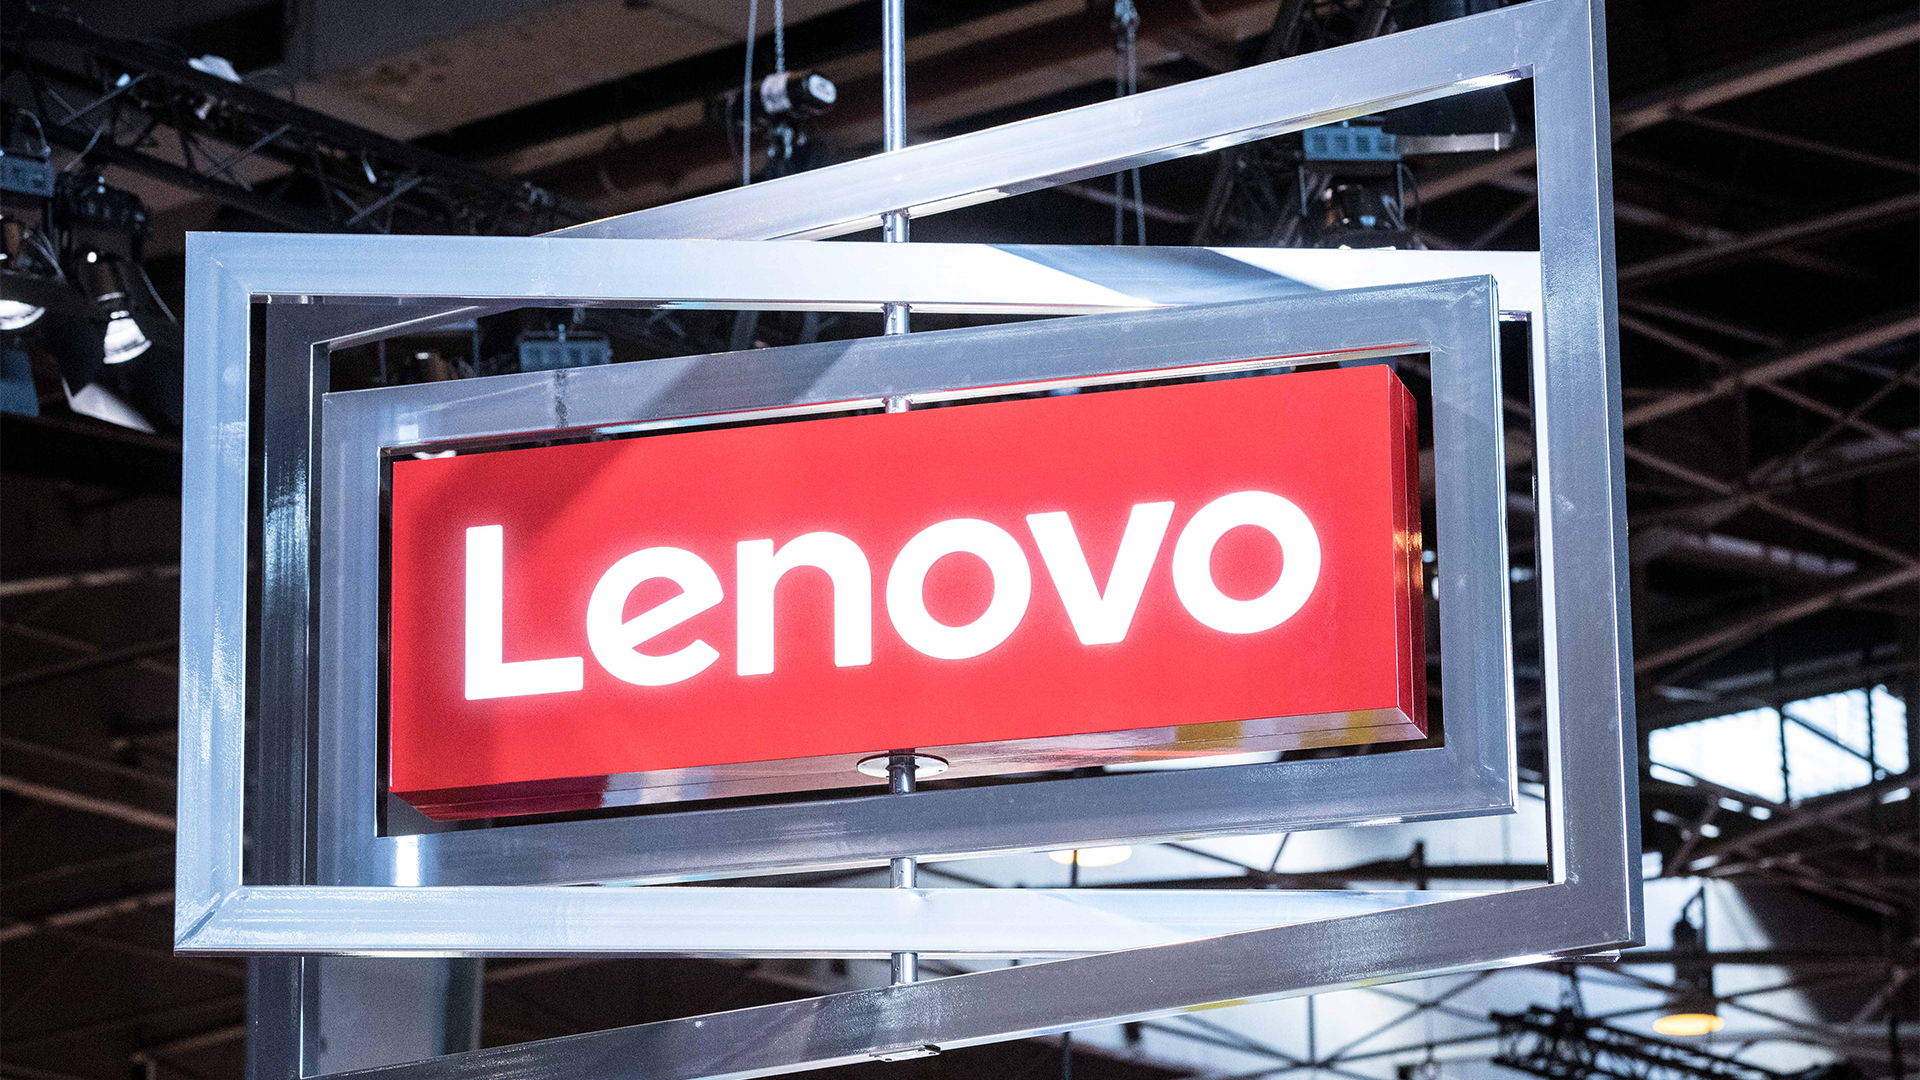 Lenovo's new sustainability program seeks to extend the life cycle of devices